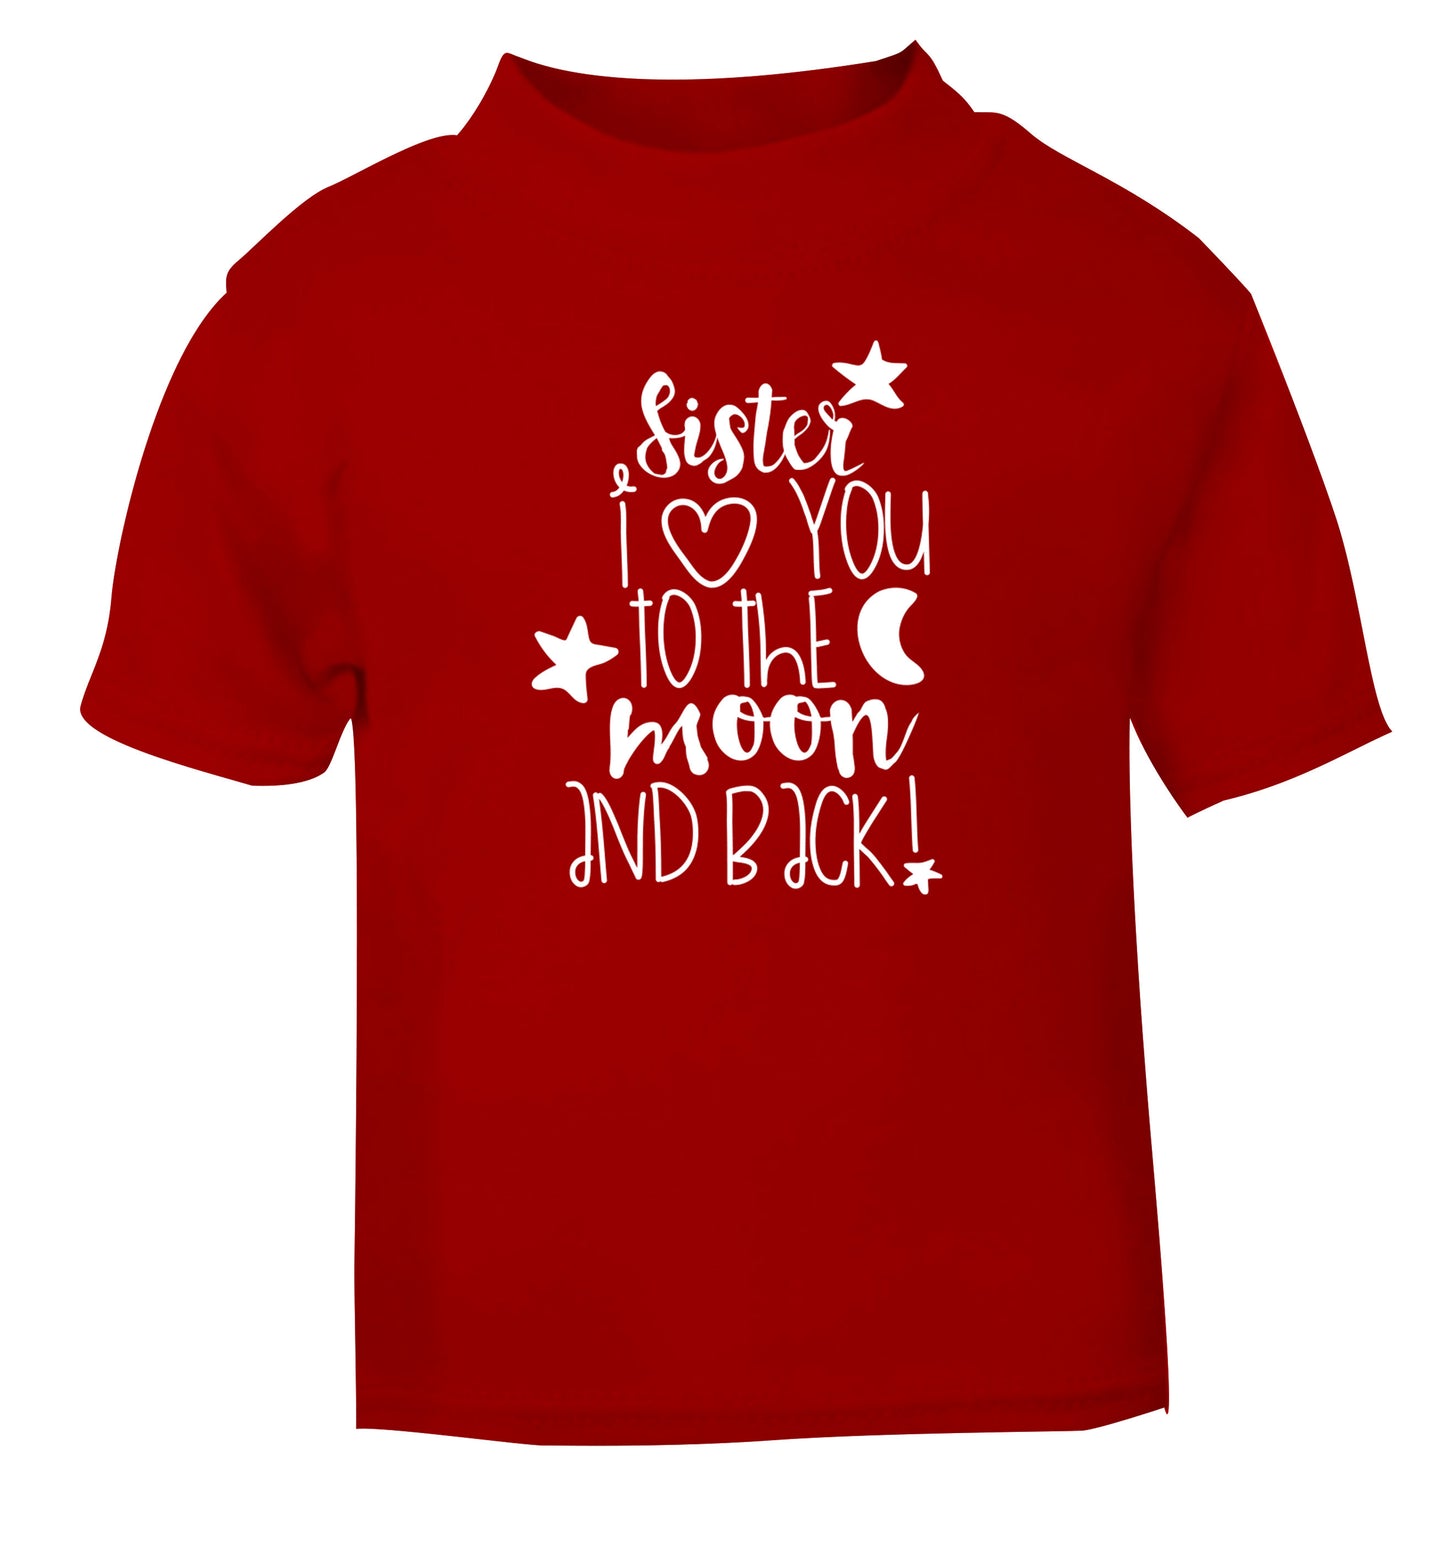 Sister I love you to the moon and back red Baby Toddler Tshirt 2 Years